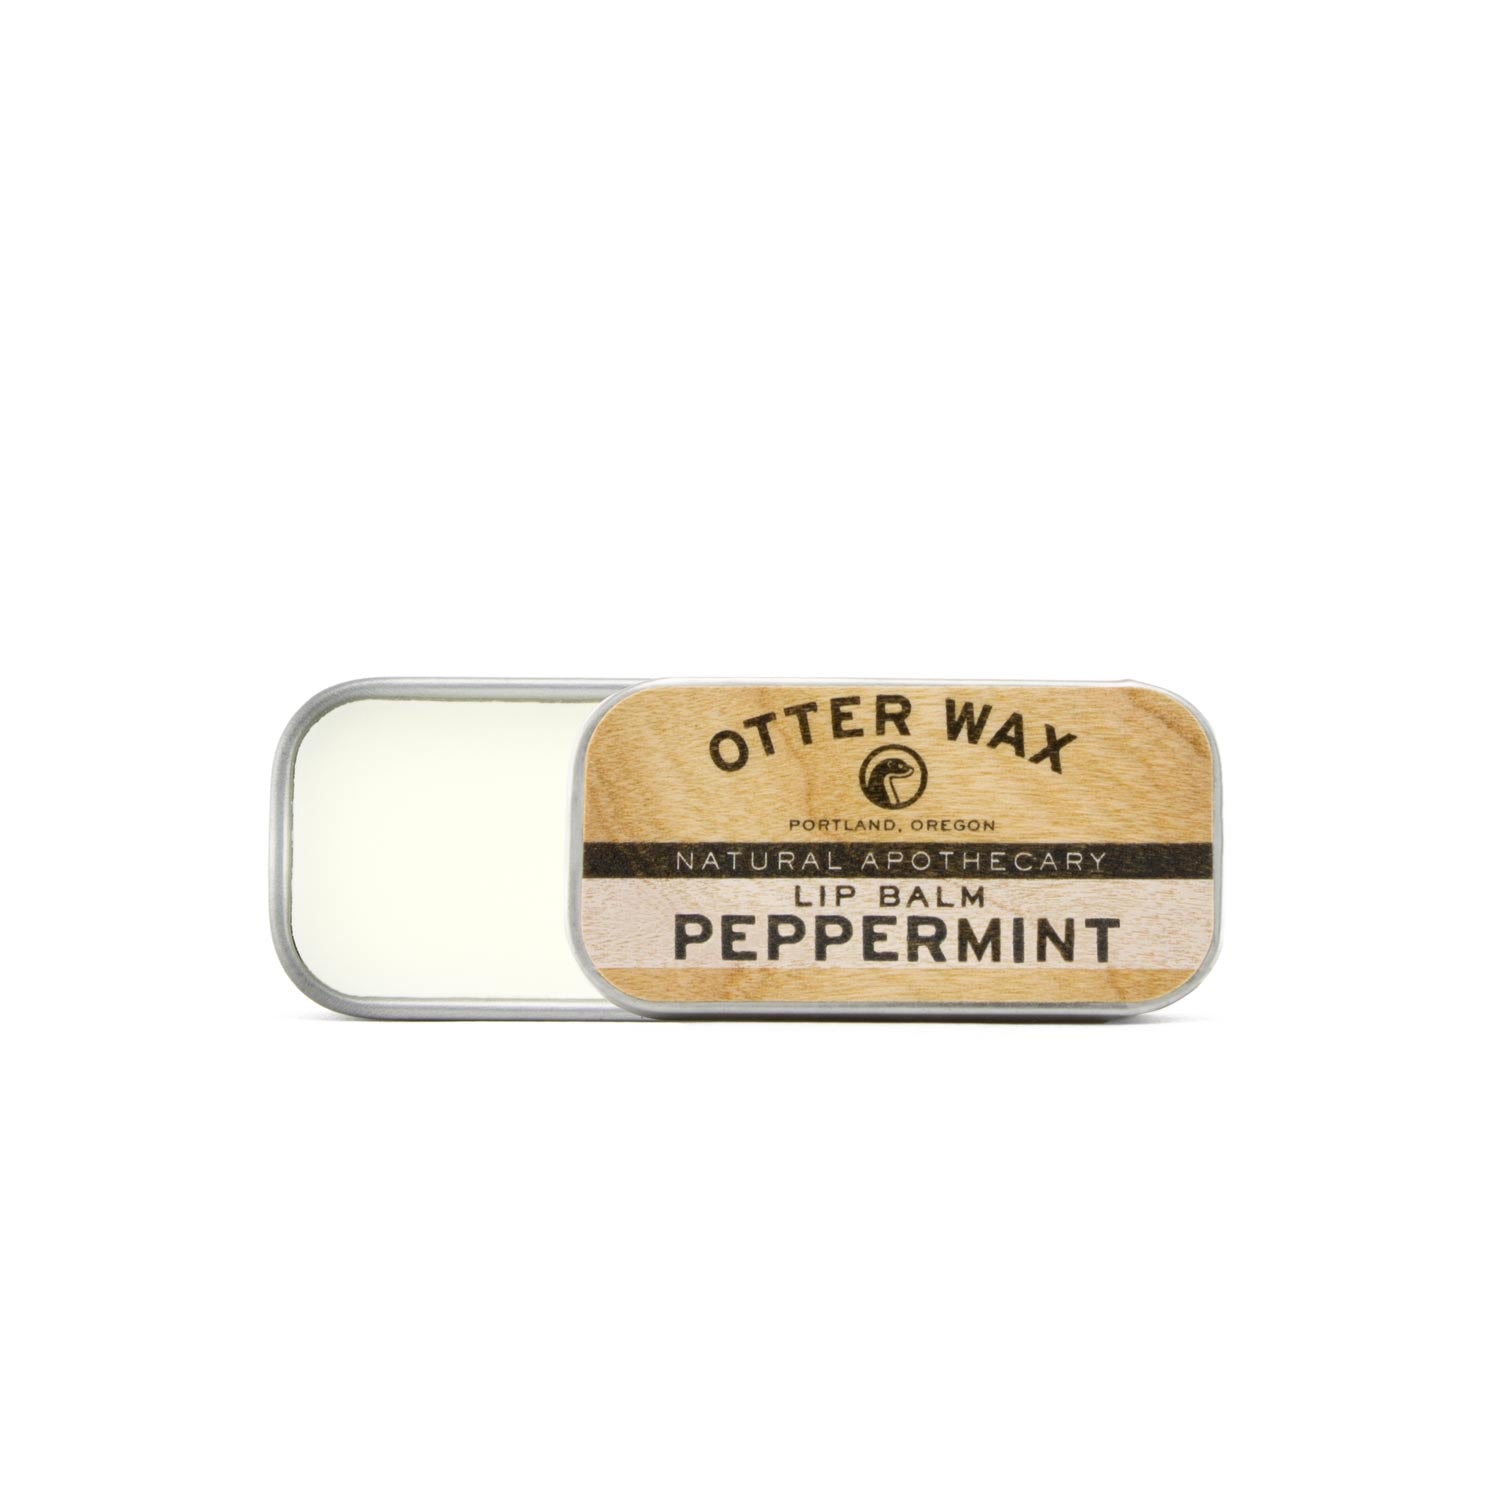 Otter Wax All Natural Peppermint Moisturizing Lip Balm Treatment With Beeswax Shea Butter And Essential Oils To Nourish Hydrate And Heal Dry Cracked Lips